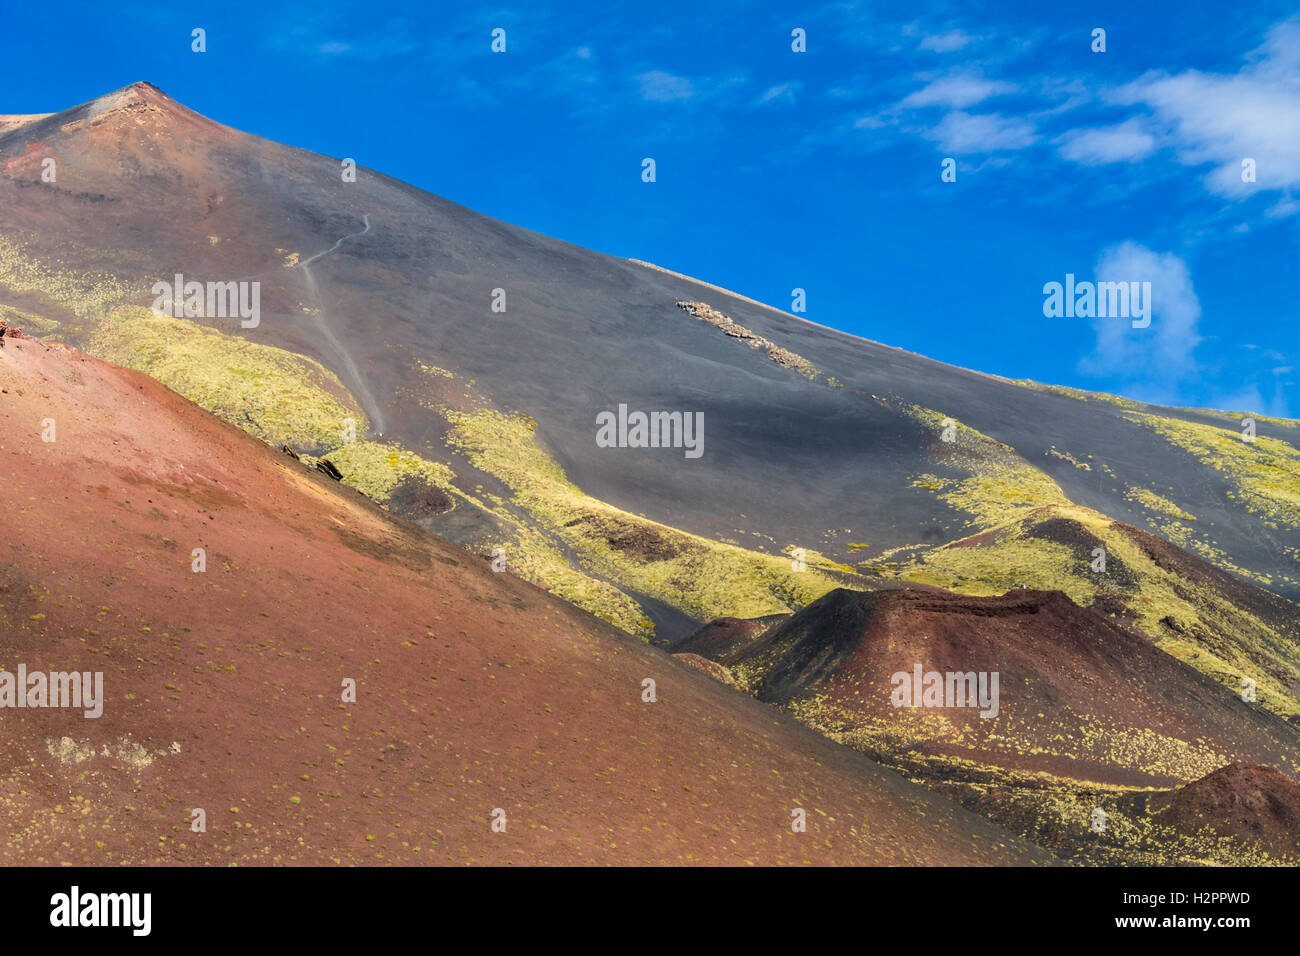 Etna volcano, steep hills of lava, saturated color, blue clear sky Stock Photo